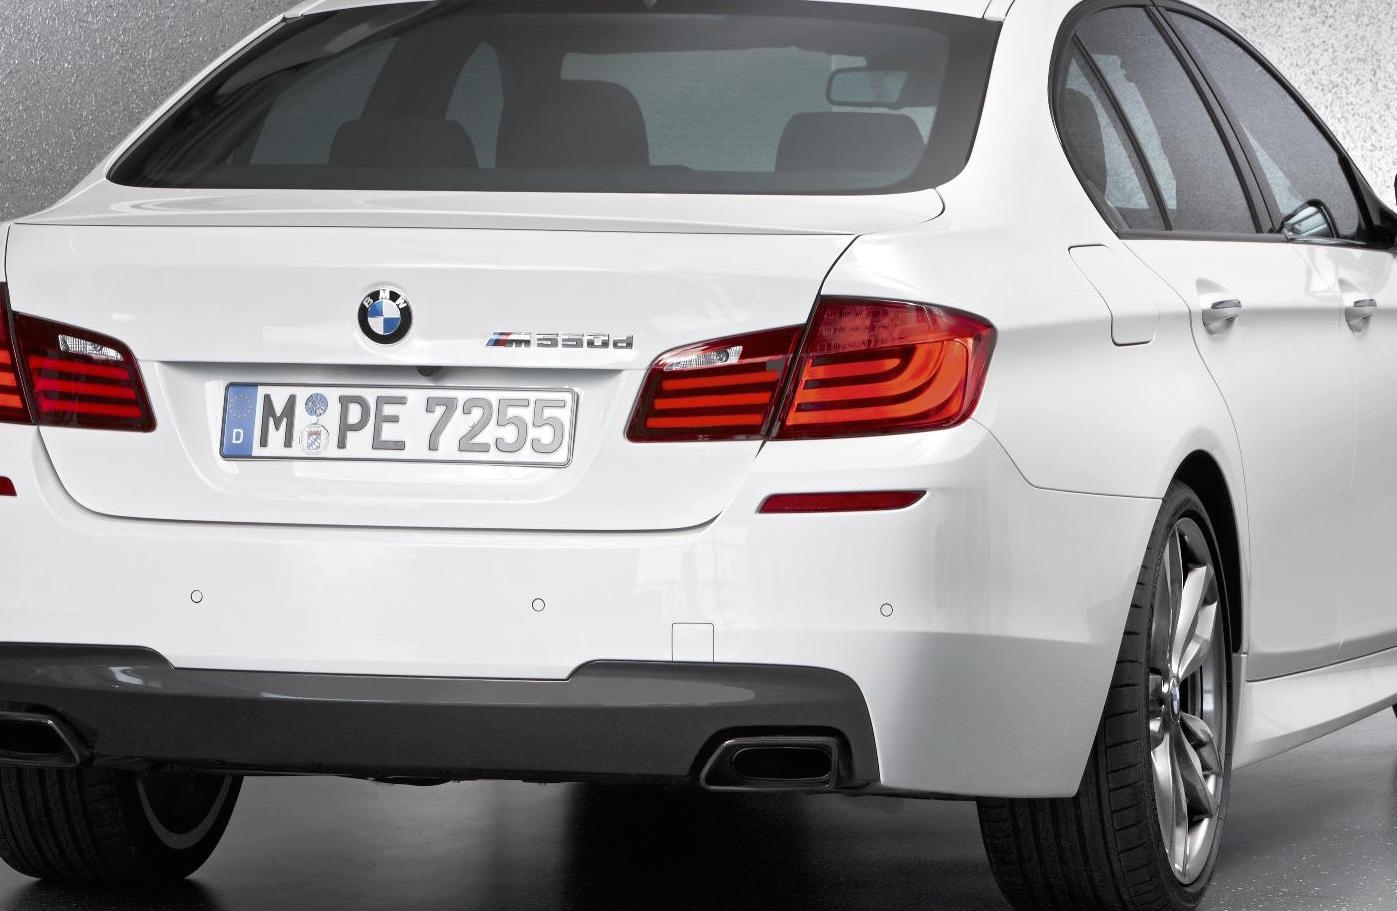 Report: BMW G30 M550d Might Receive Quad-Turbo Pot with Whopping Power